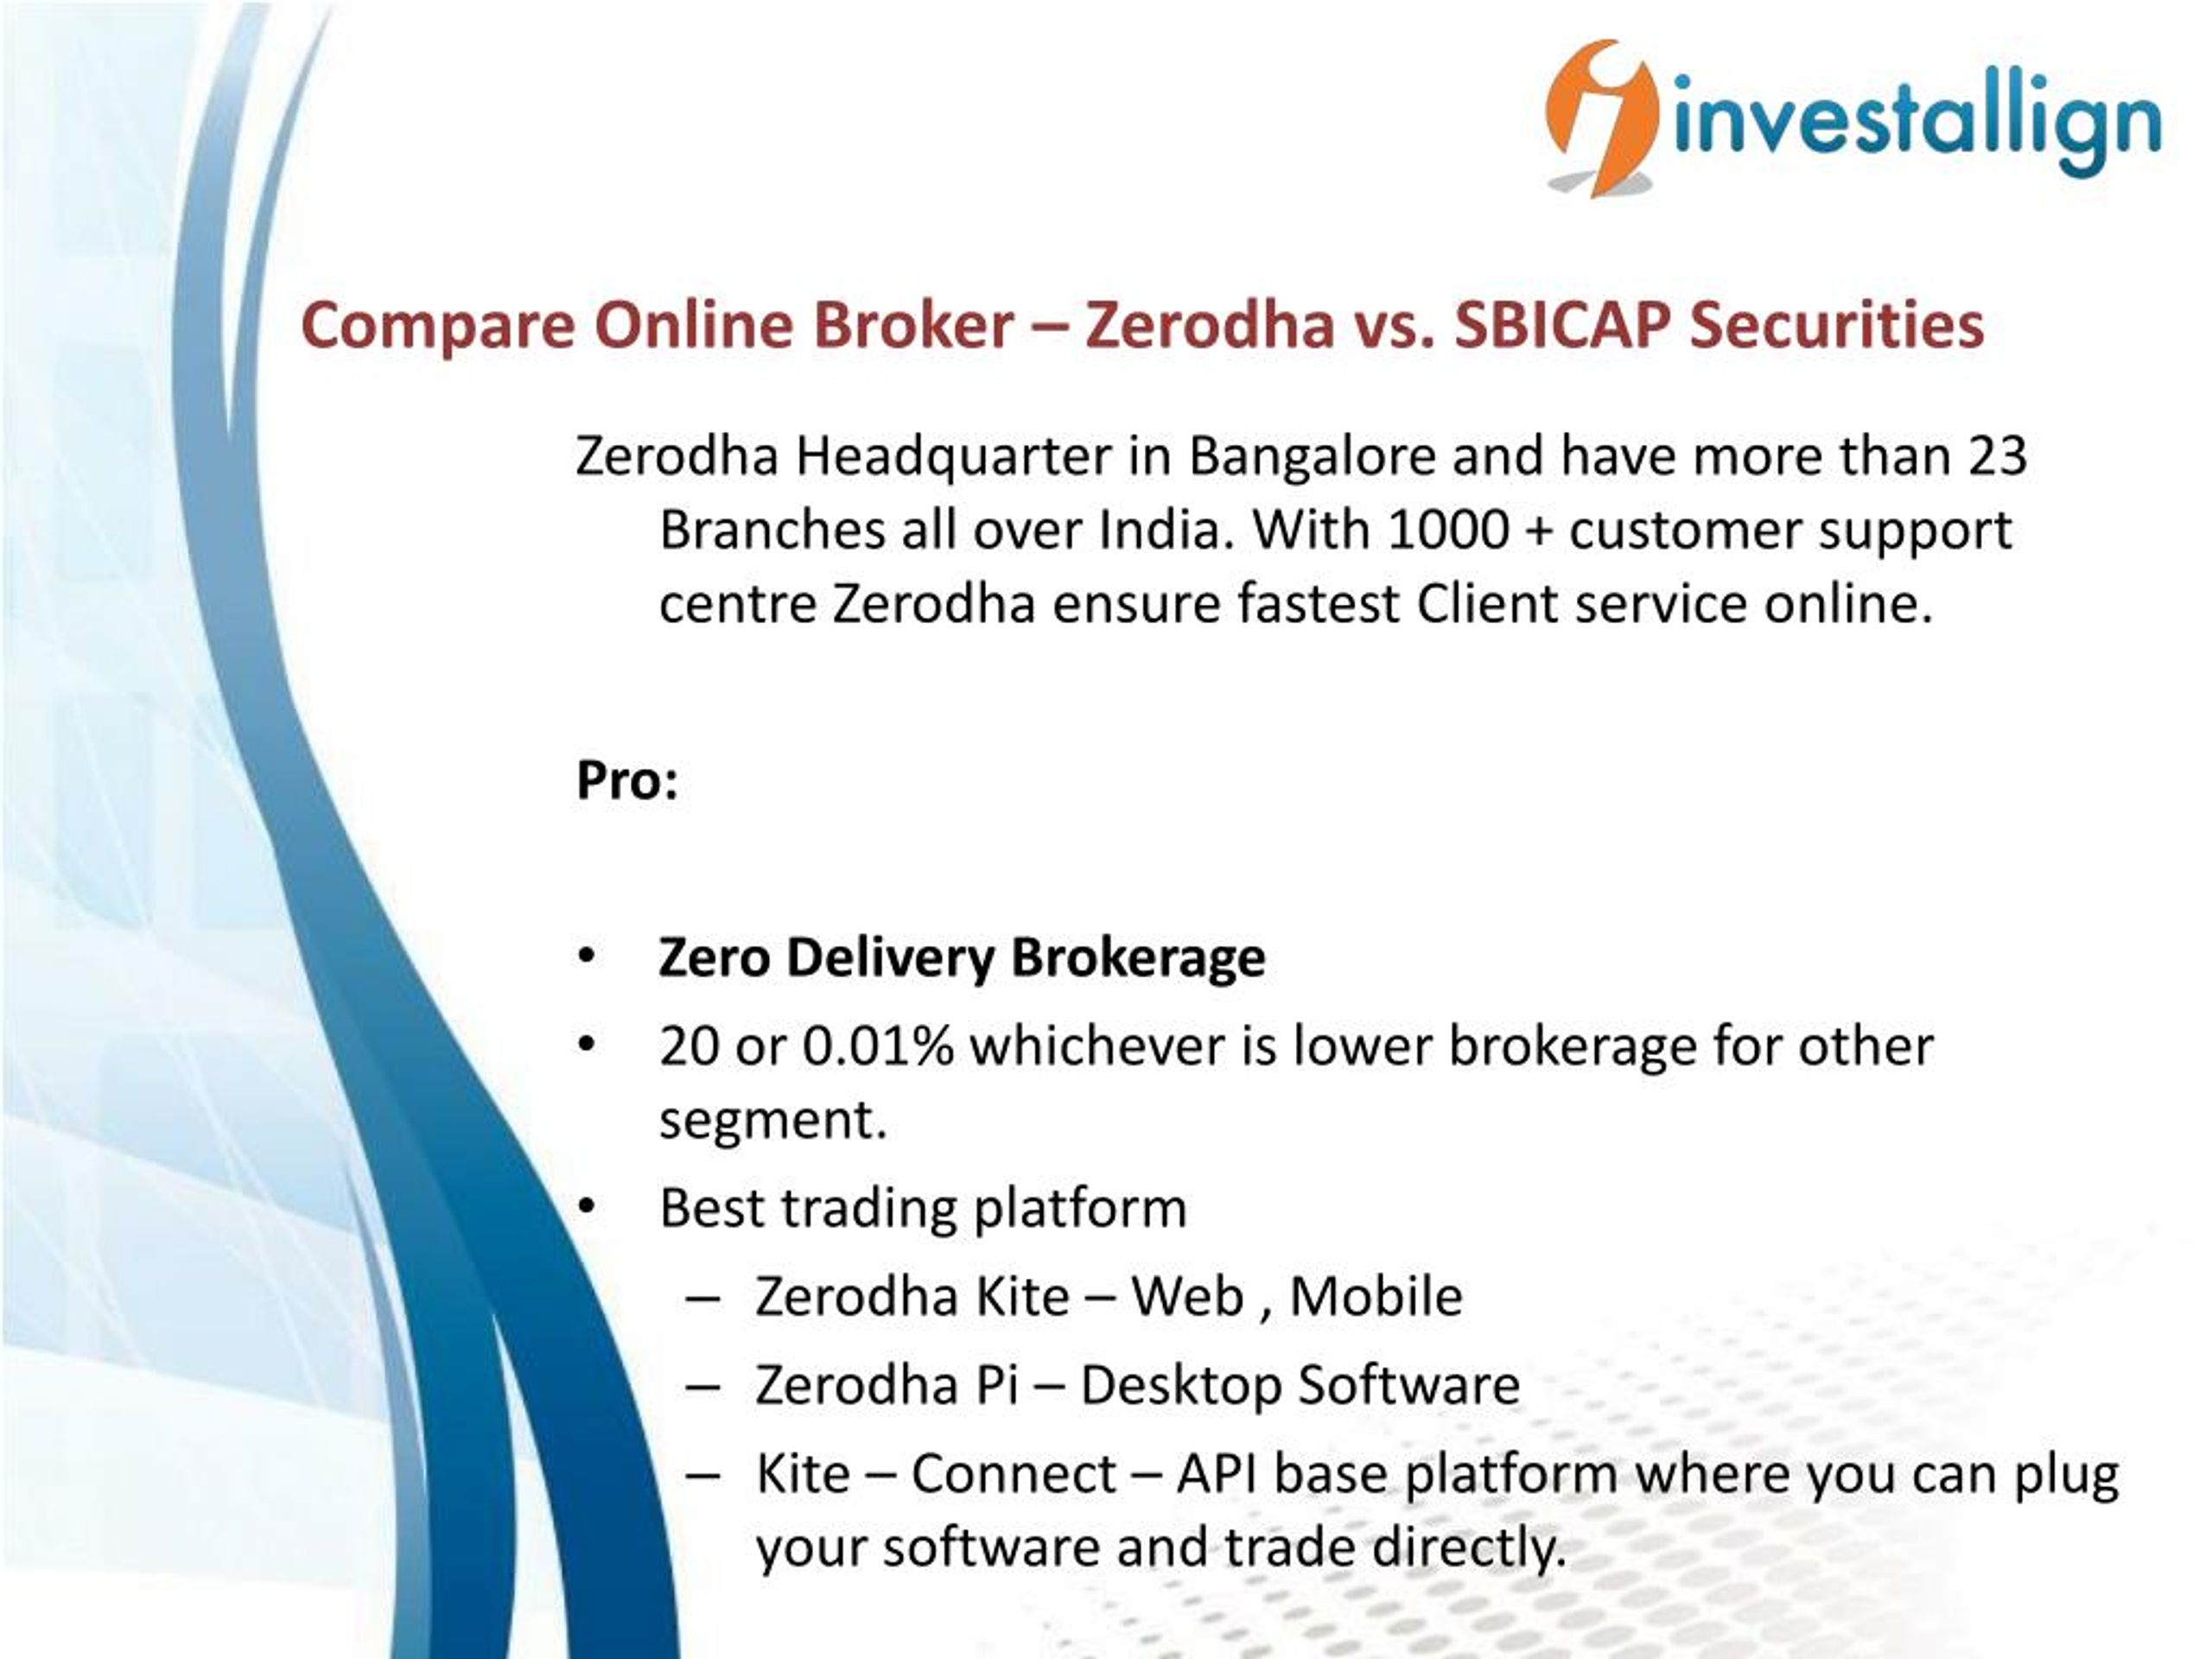 Ppt Compare Zerodha Vs Sbicap Securities Brokerage Charges Investallign Powerpoint 1747